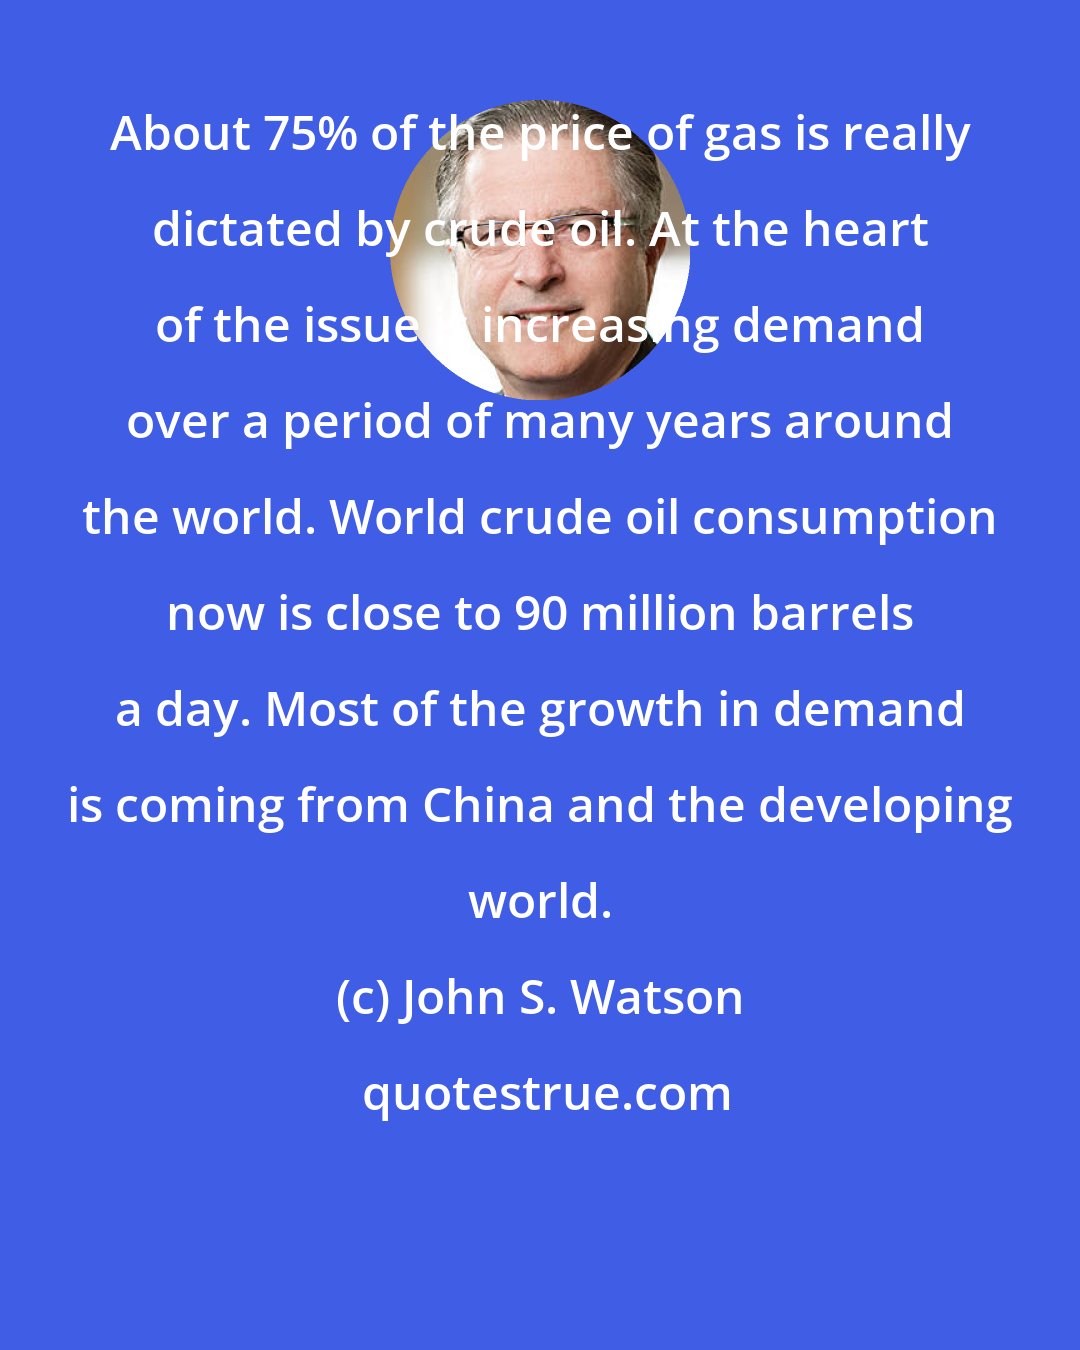 John S. Watson: About 75% of the price of gas is really dictated by crude oil. At the heart of the issue is increasing demand over a period of many years around the world. World crude oil consumption now is close to 90 million barrels a day. Most of the growth in demand is coming from China and the developing world.